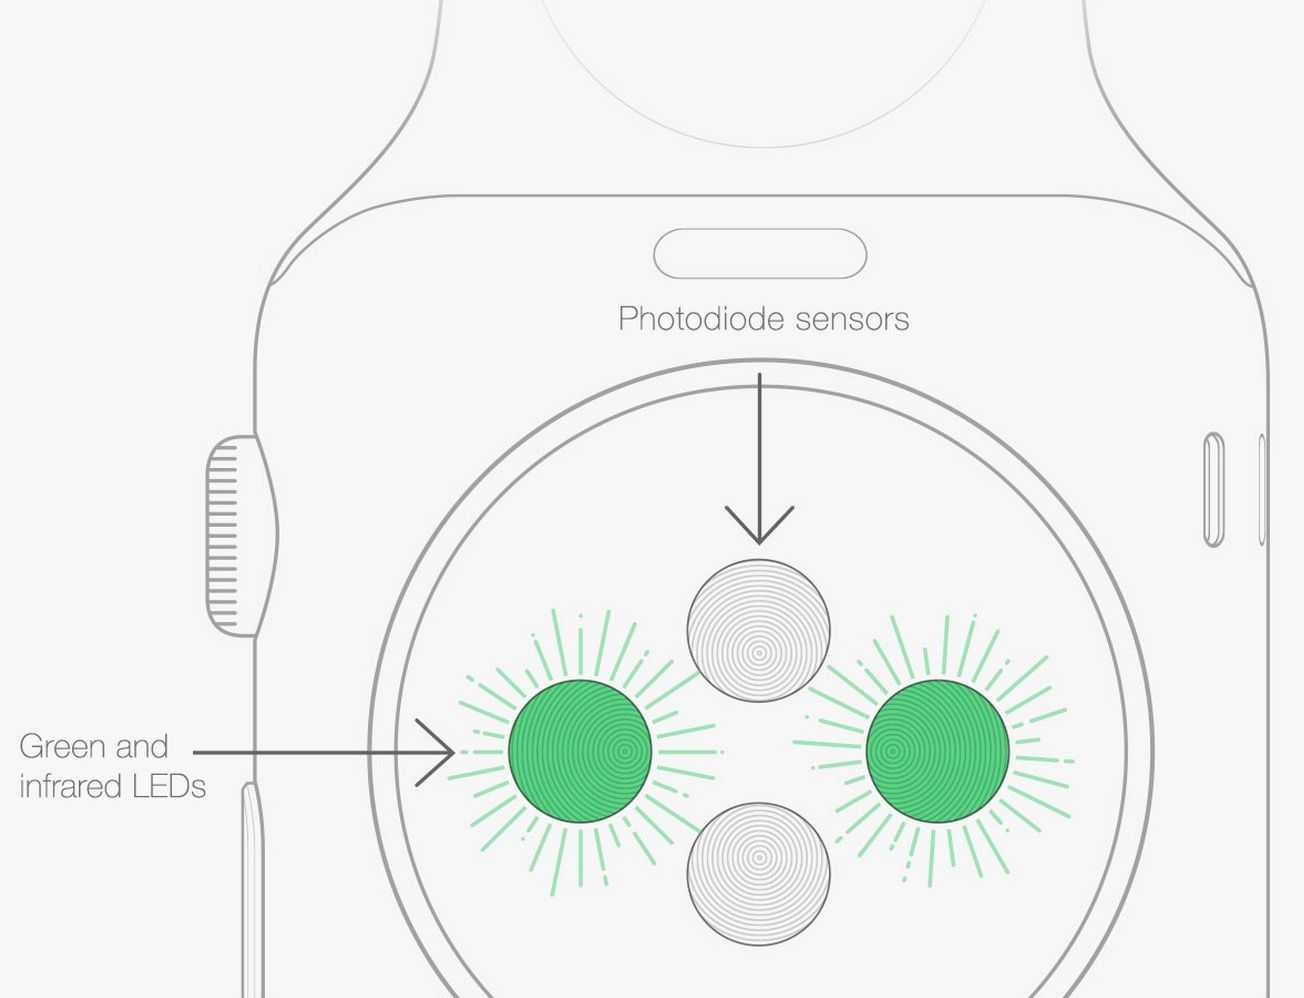 tattoogate apple confirms wrist tattoos can impact apple watch performance image 1